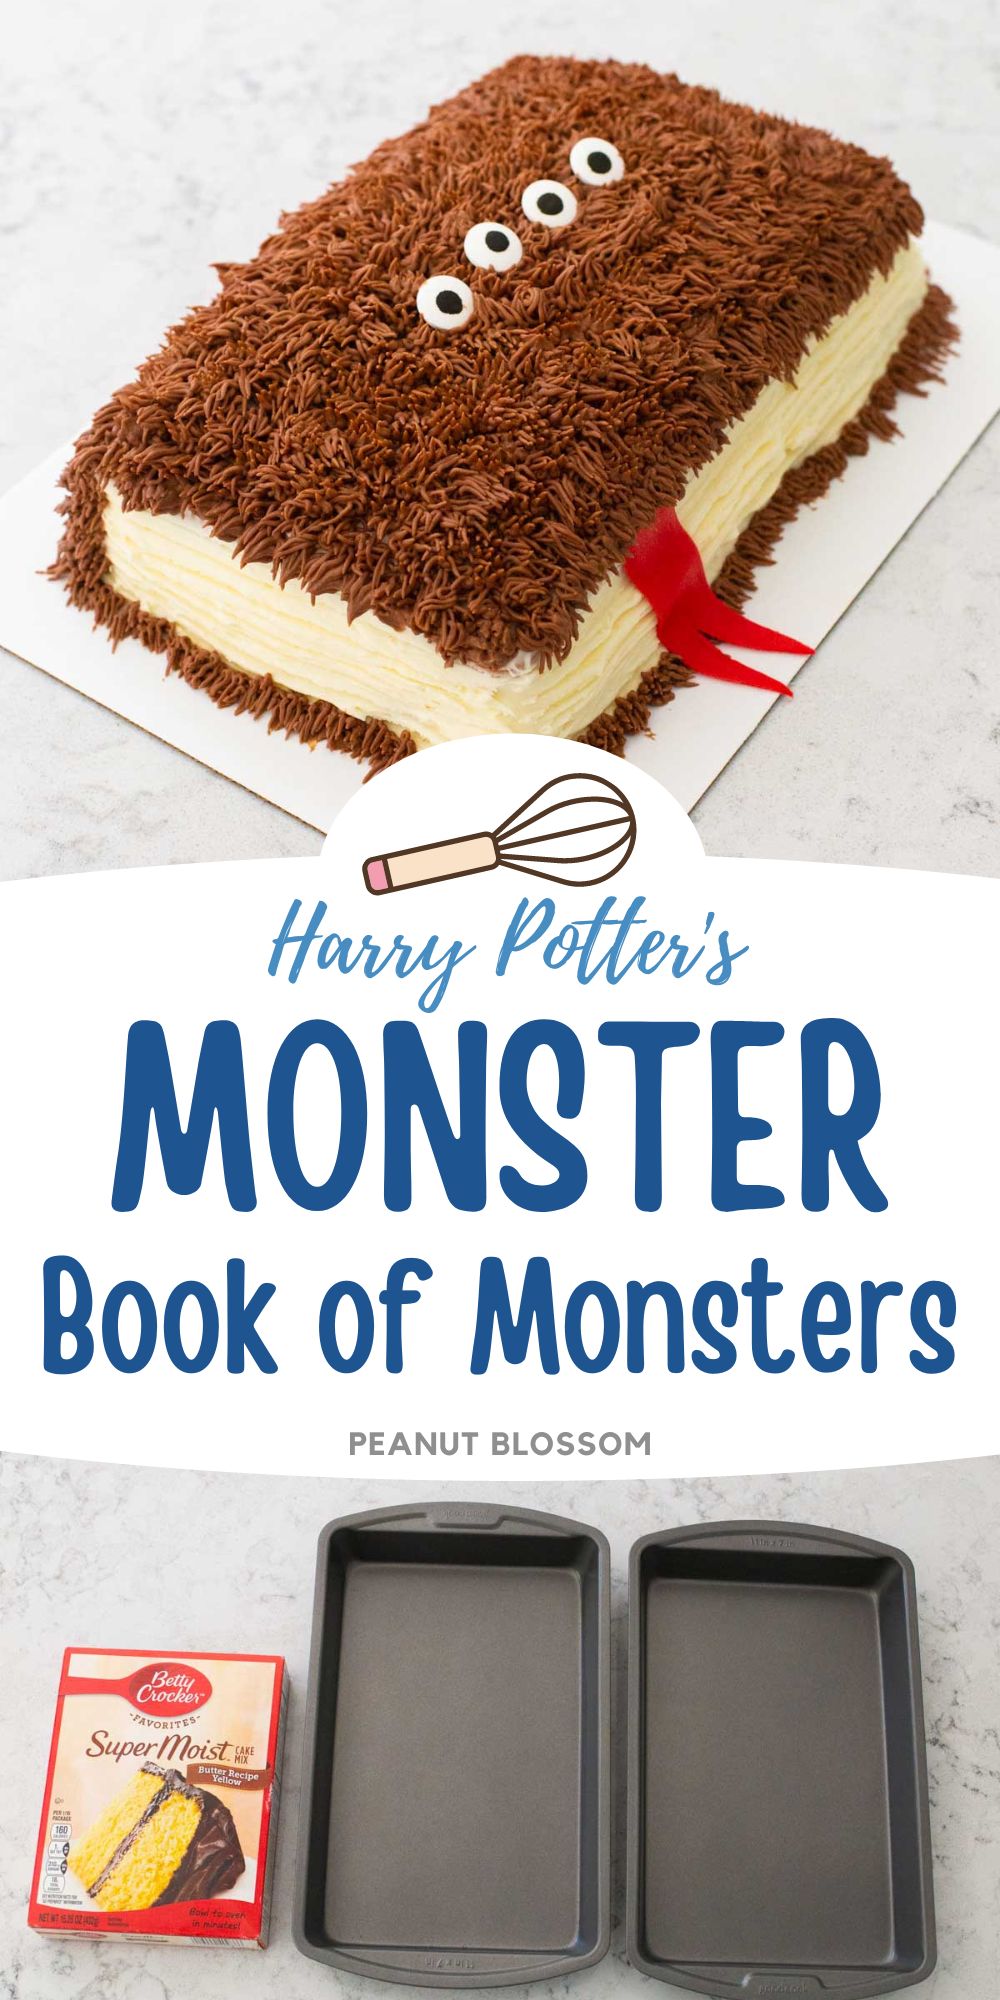 The photo collage shows the Harry Potter Monster cake next to a photo that shows the cake pans used to bake it.